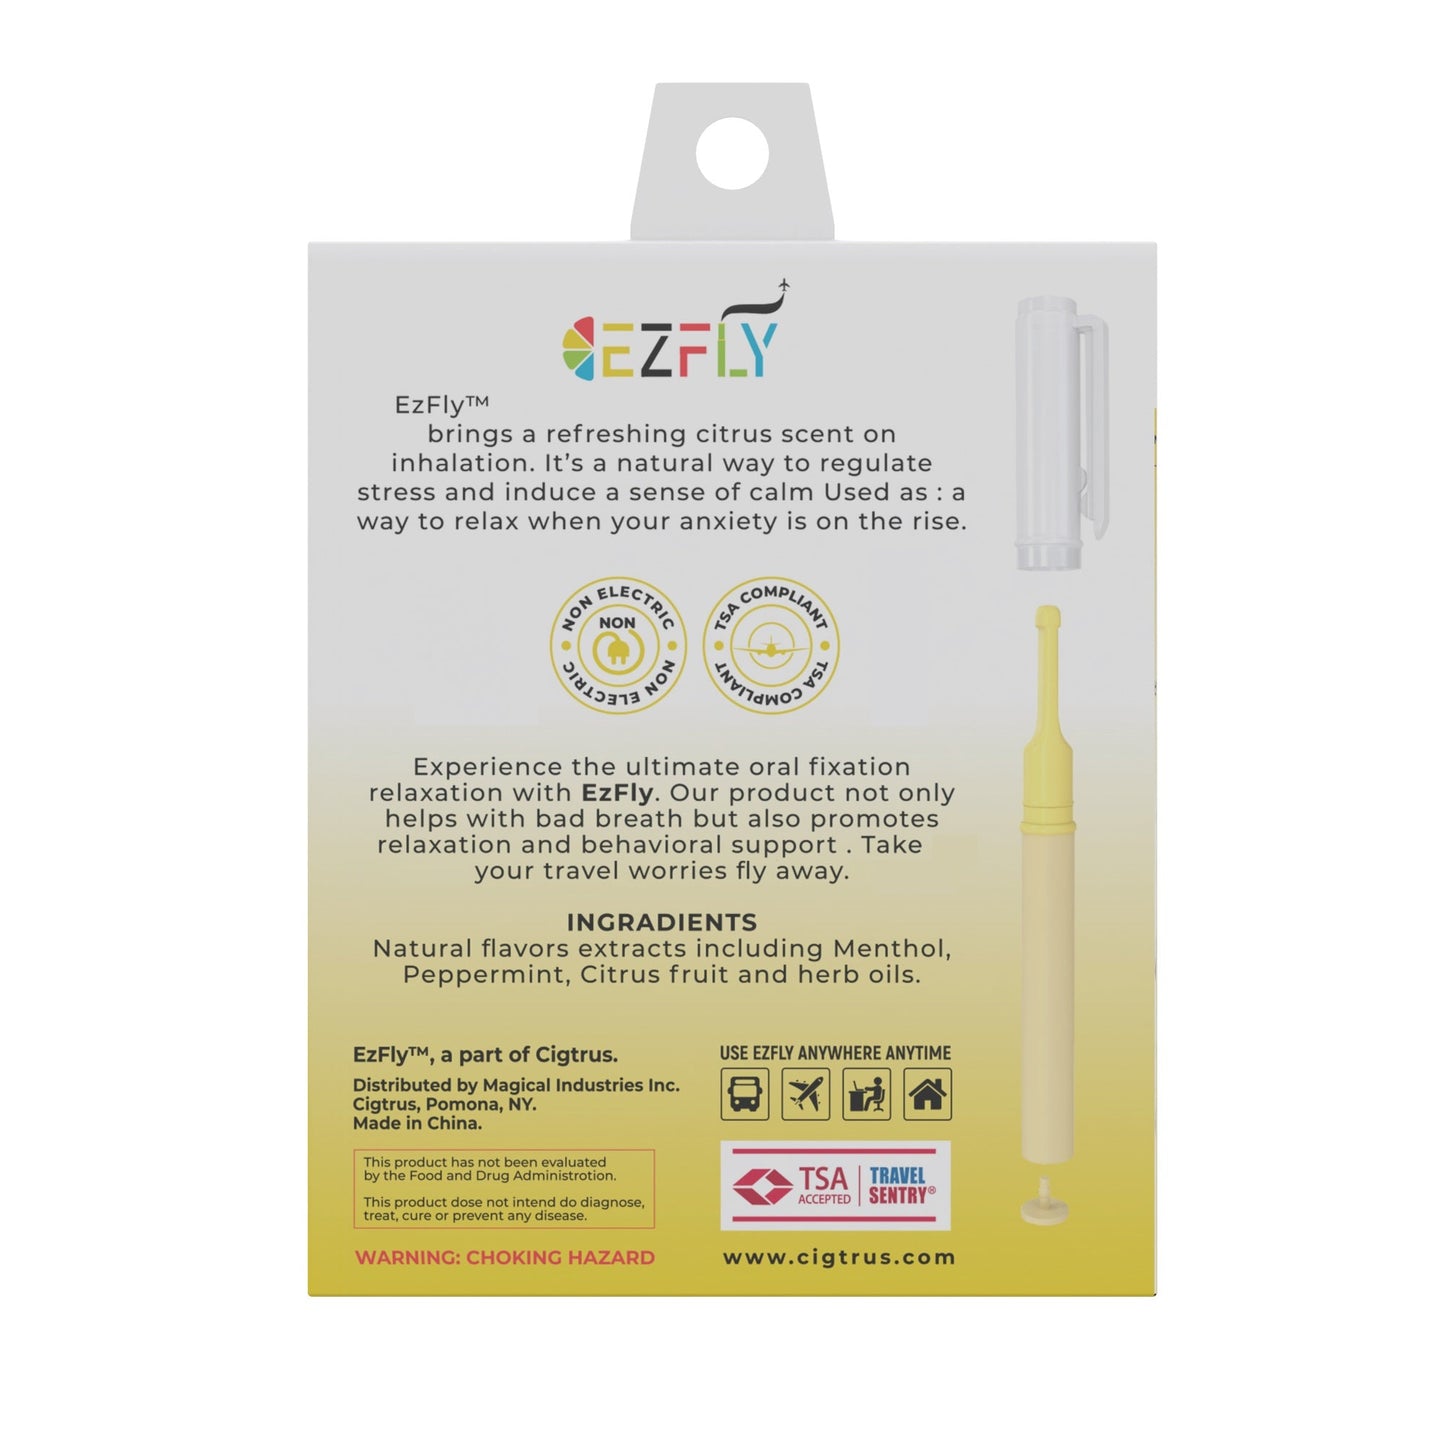 EZFLY: TSA-Accepted Non-Electric Smokeless Flavored Air Puffer Inhaler - Your Delicious & Refreshing In-Flight Oral Fixation Alternative, 4 Flavor Variety Pack